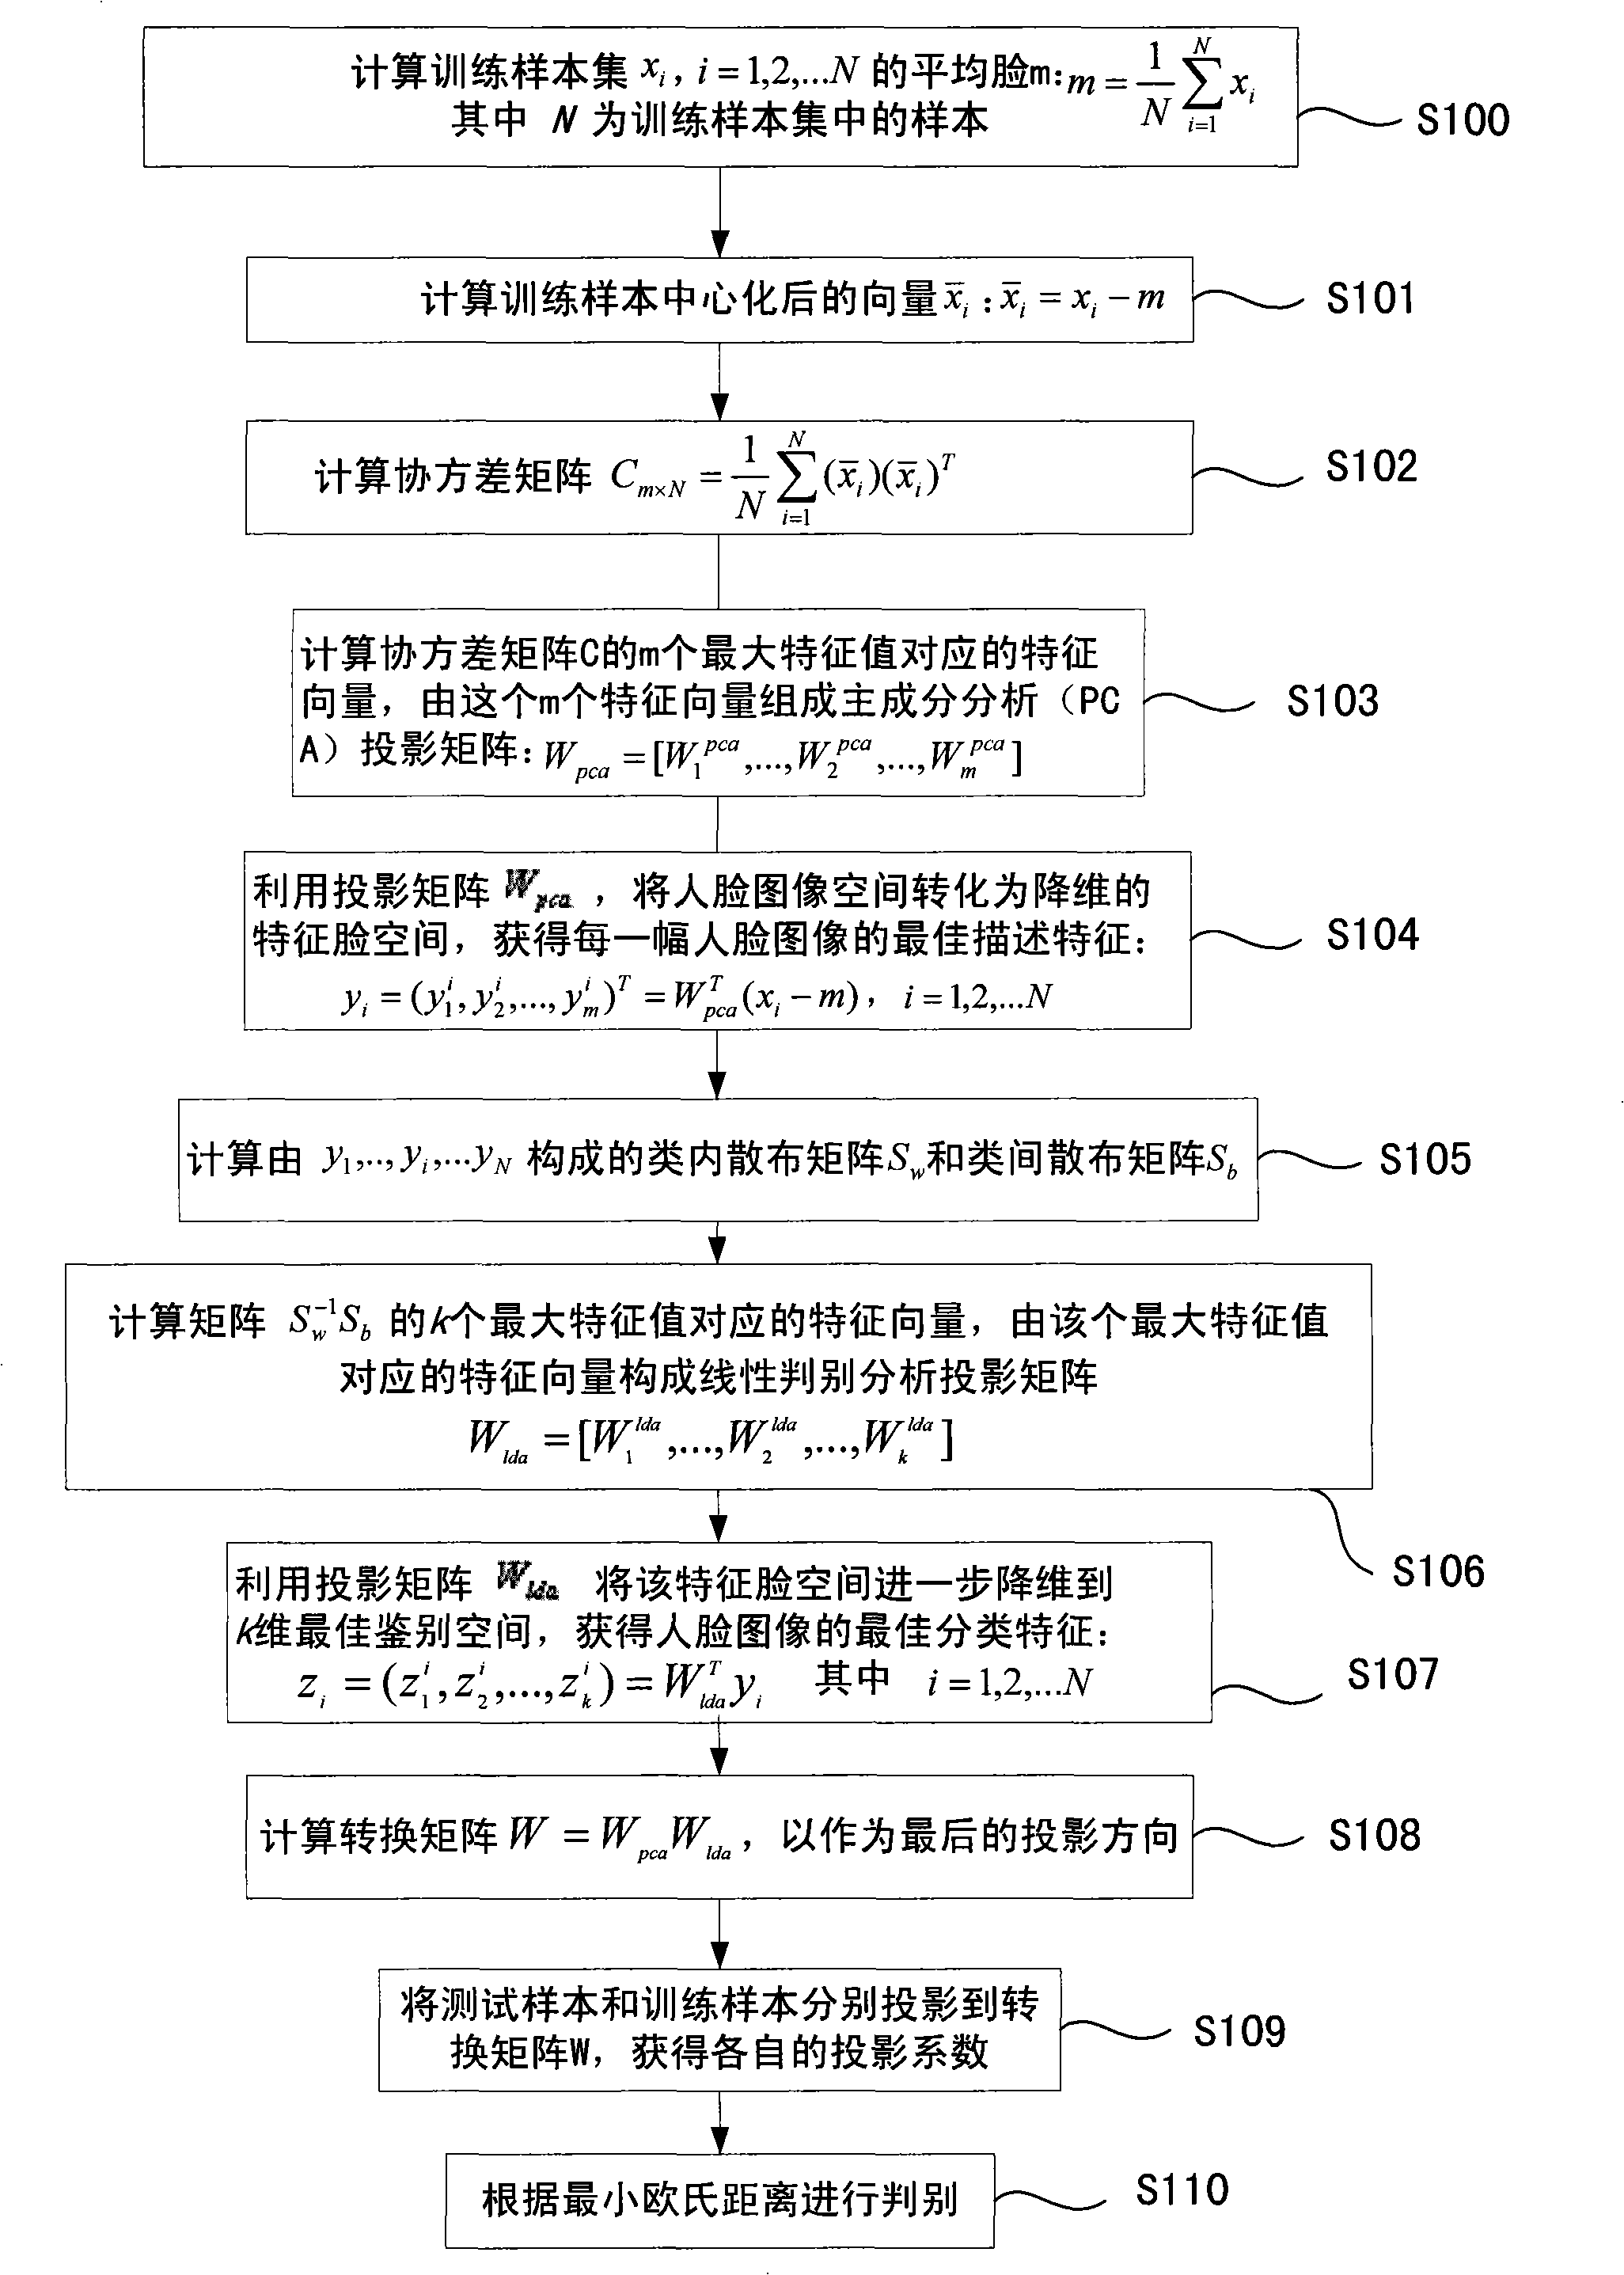 Optimized human face recognition method and apparatus